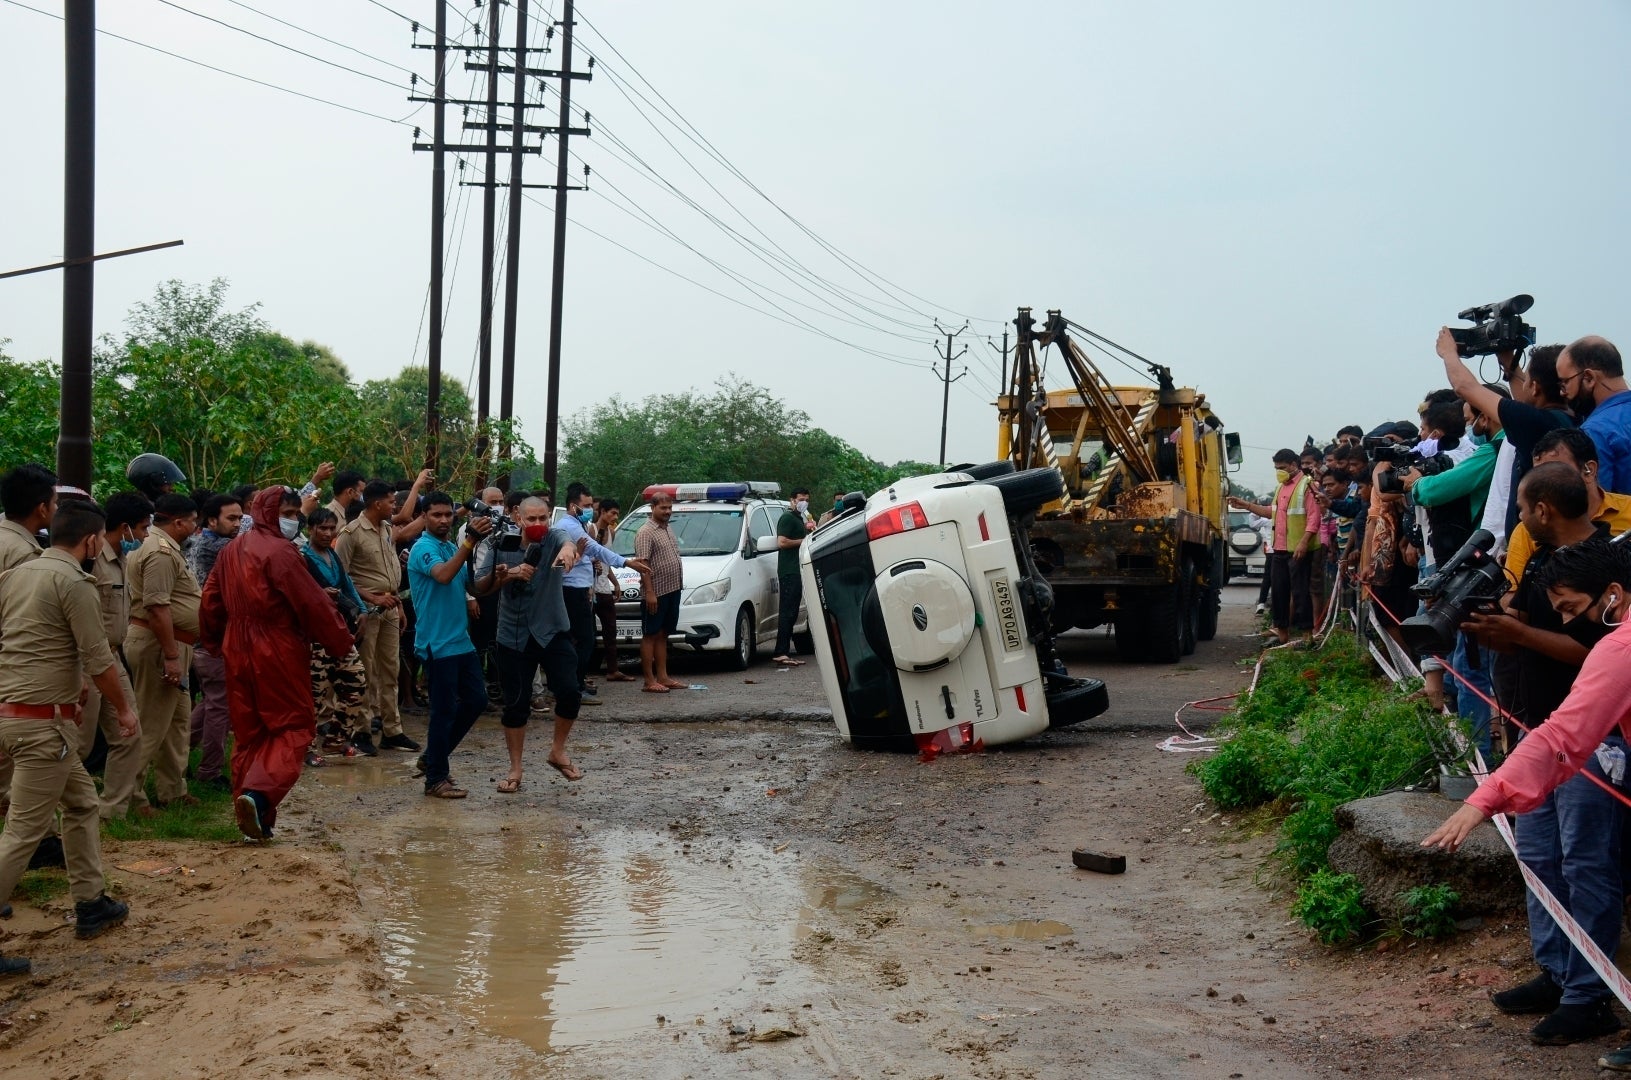 The overturned vehicle that was carrying Vikas Dubey is towed away near Kanpur on Friday